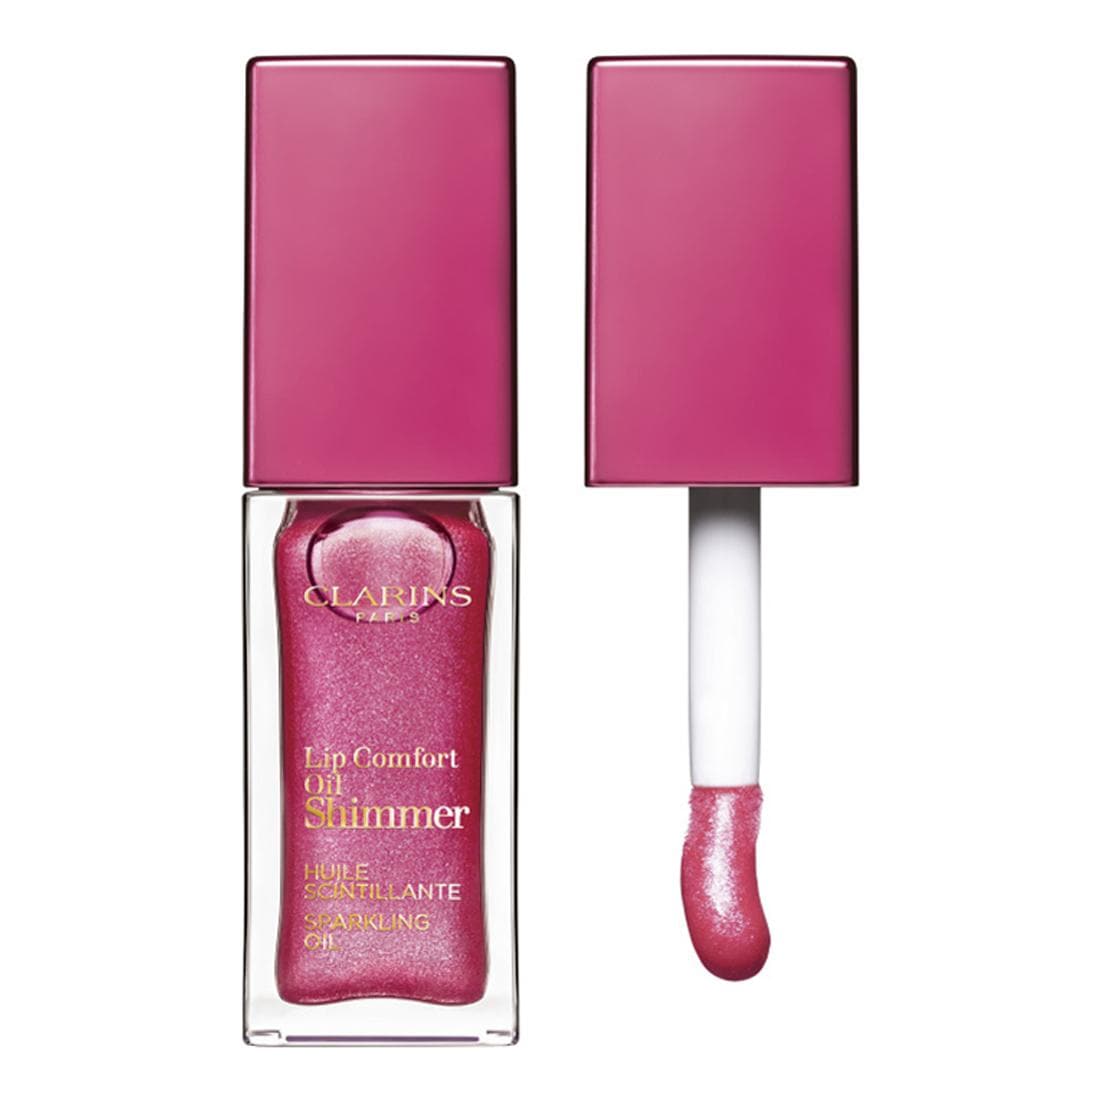 Clarins Lip Comfort Oil Shimmer, No. 05 - Pretty in Pink